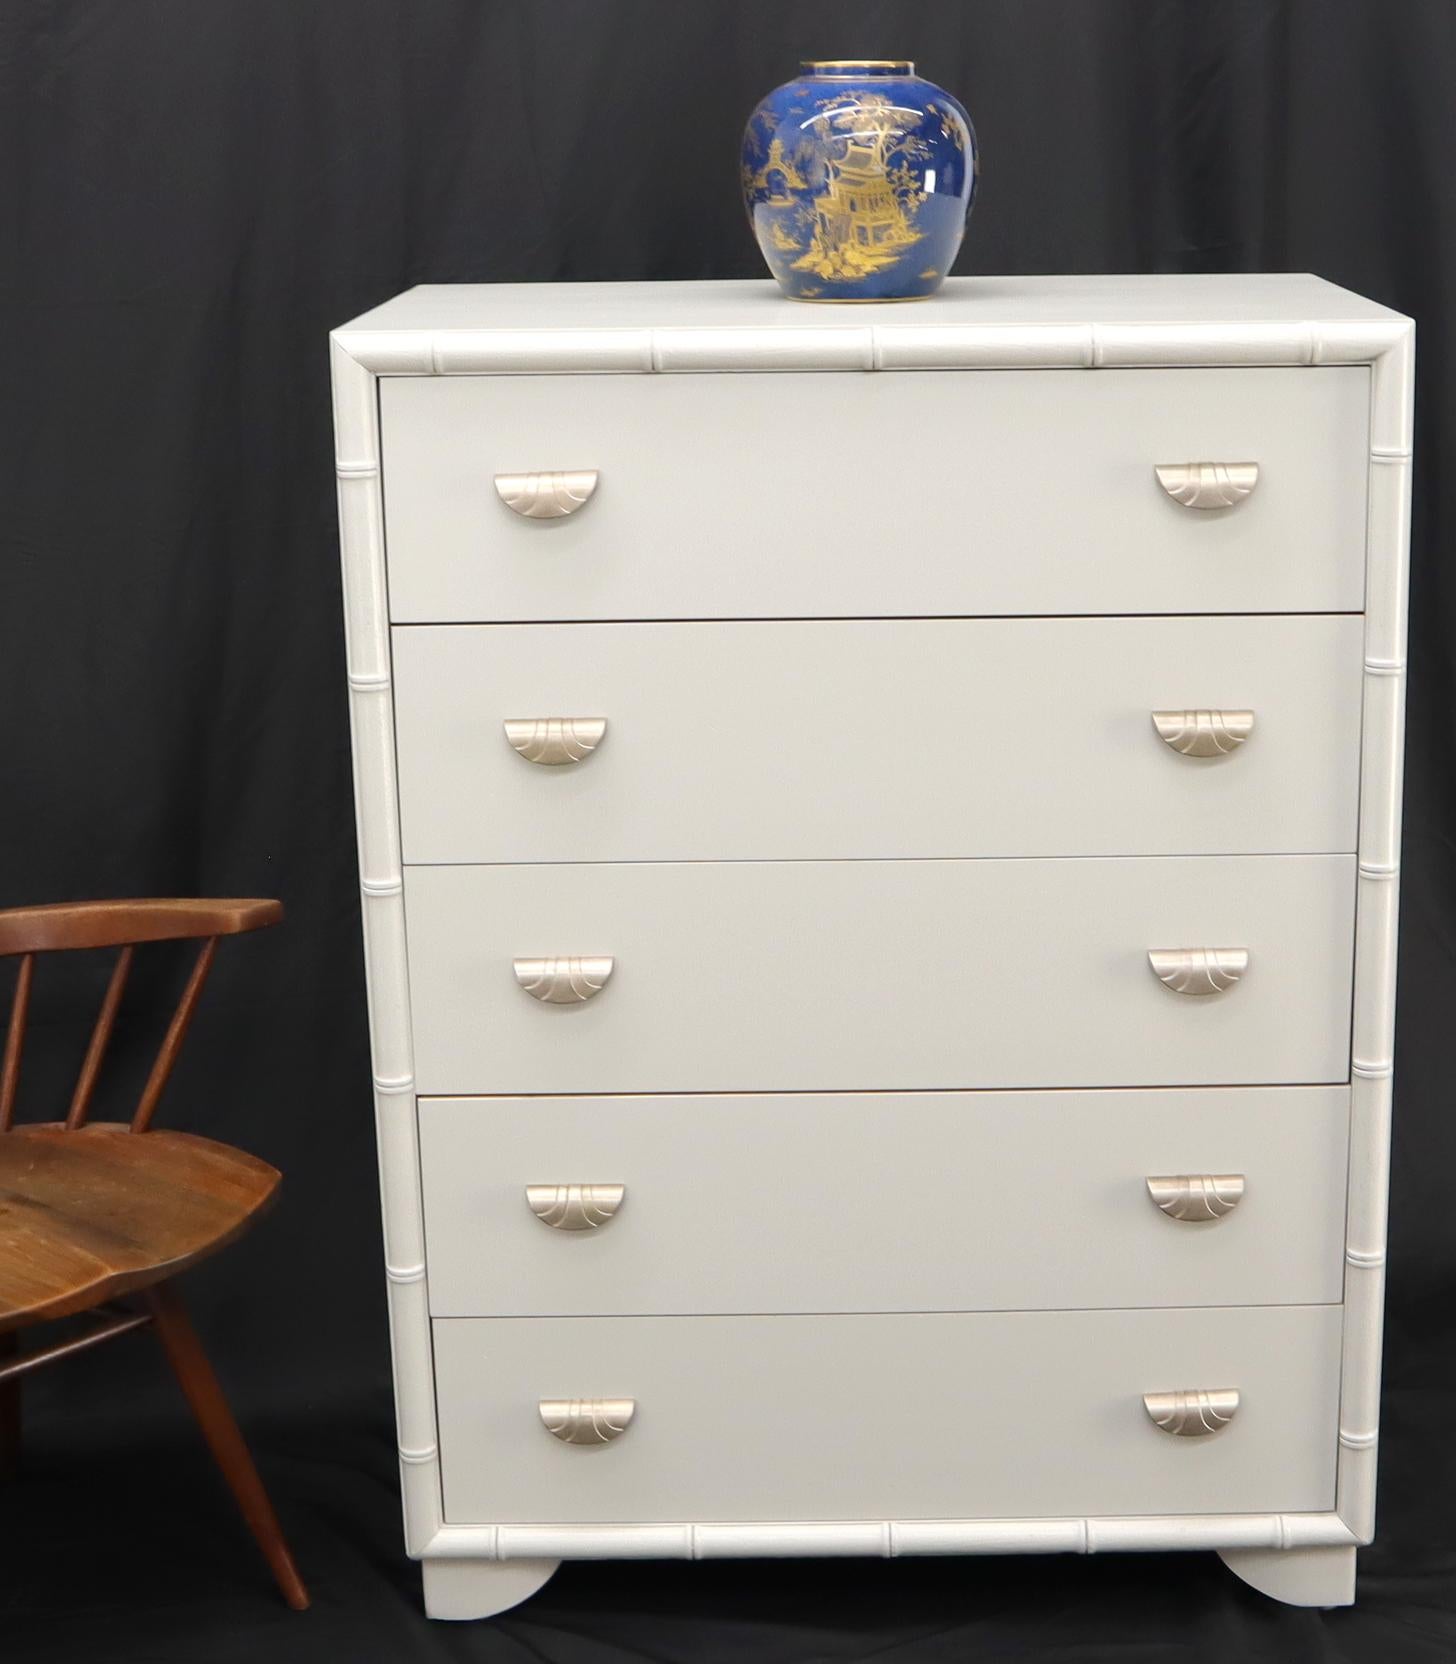 Restored mid century modern Faux bamboo off-white lacquer five drawers hi chest dresser with Art Deco style hardware.